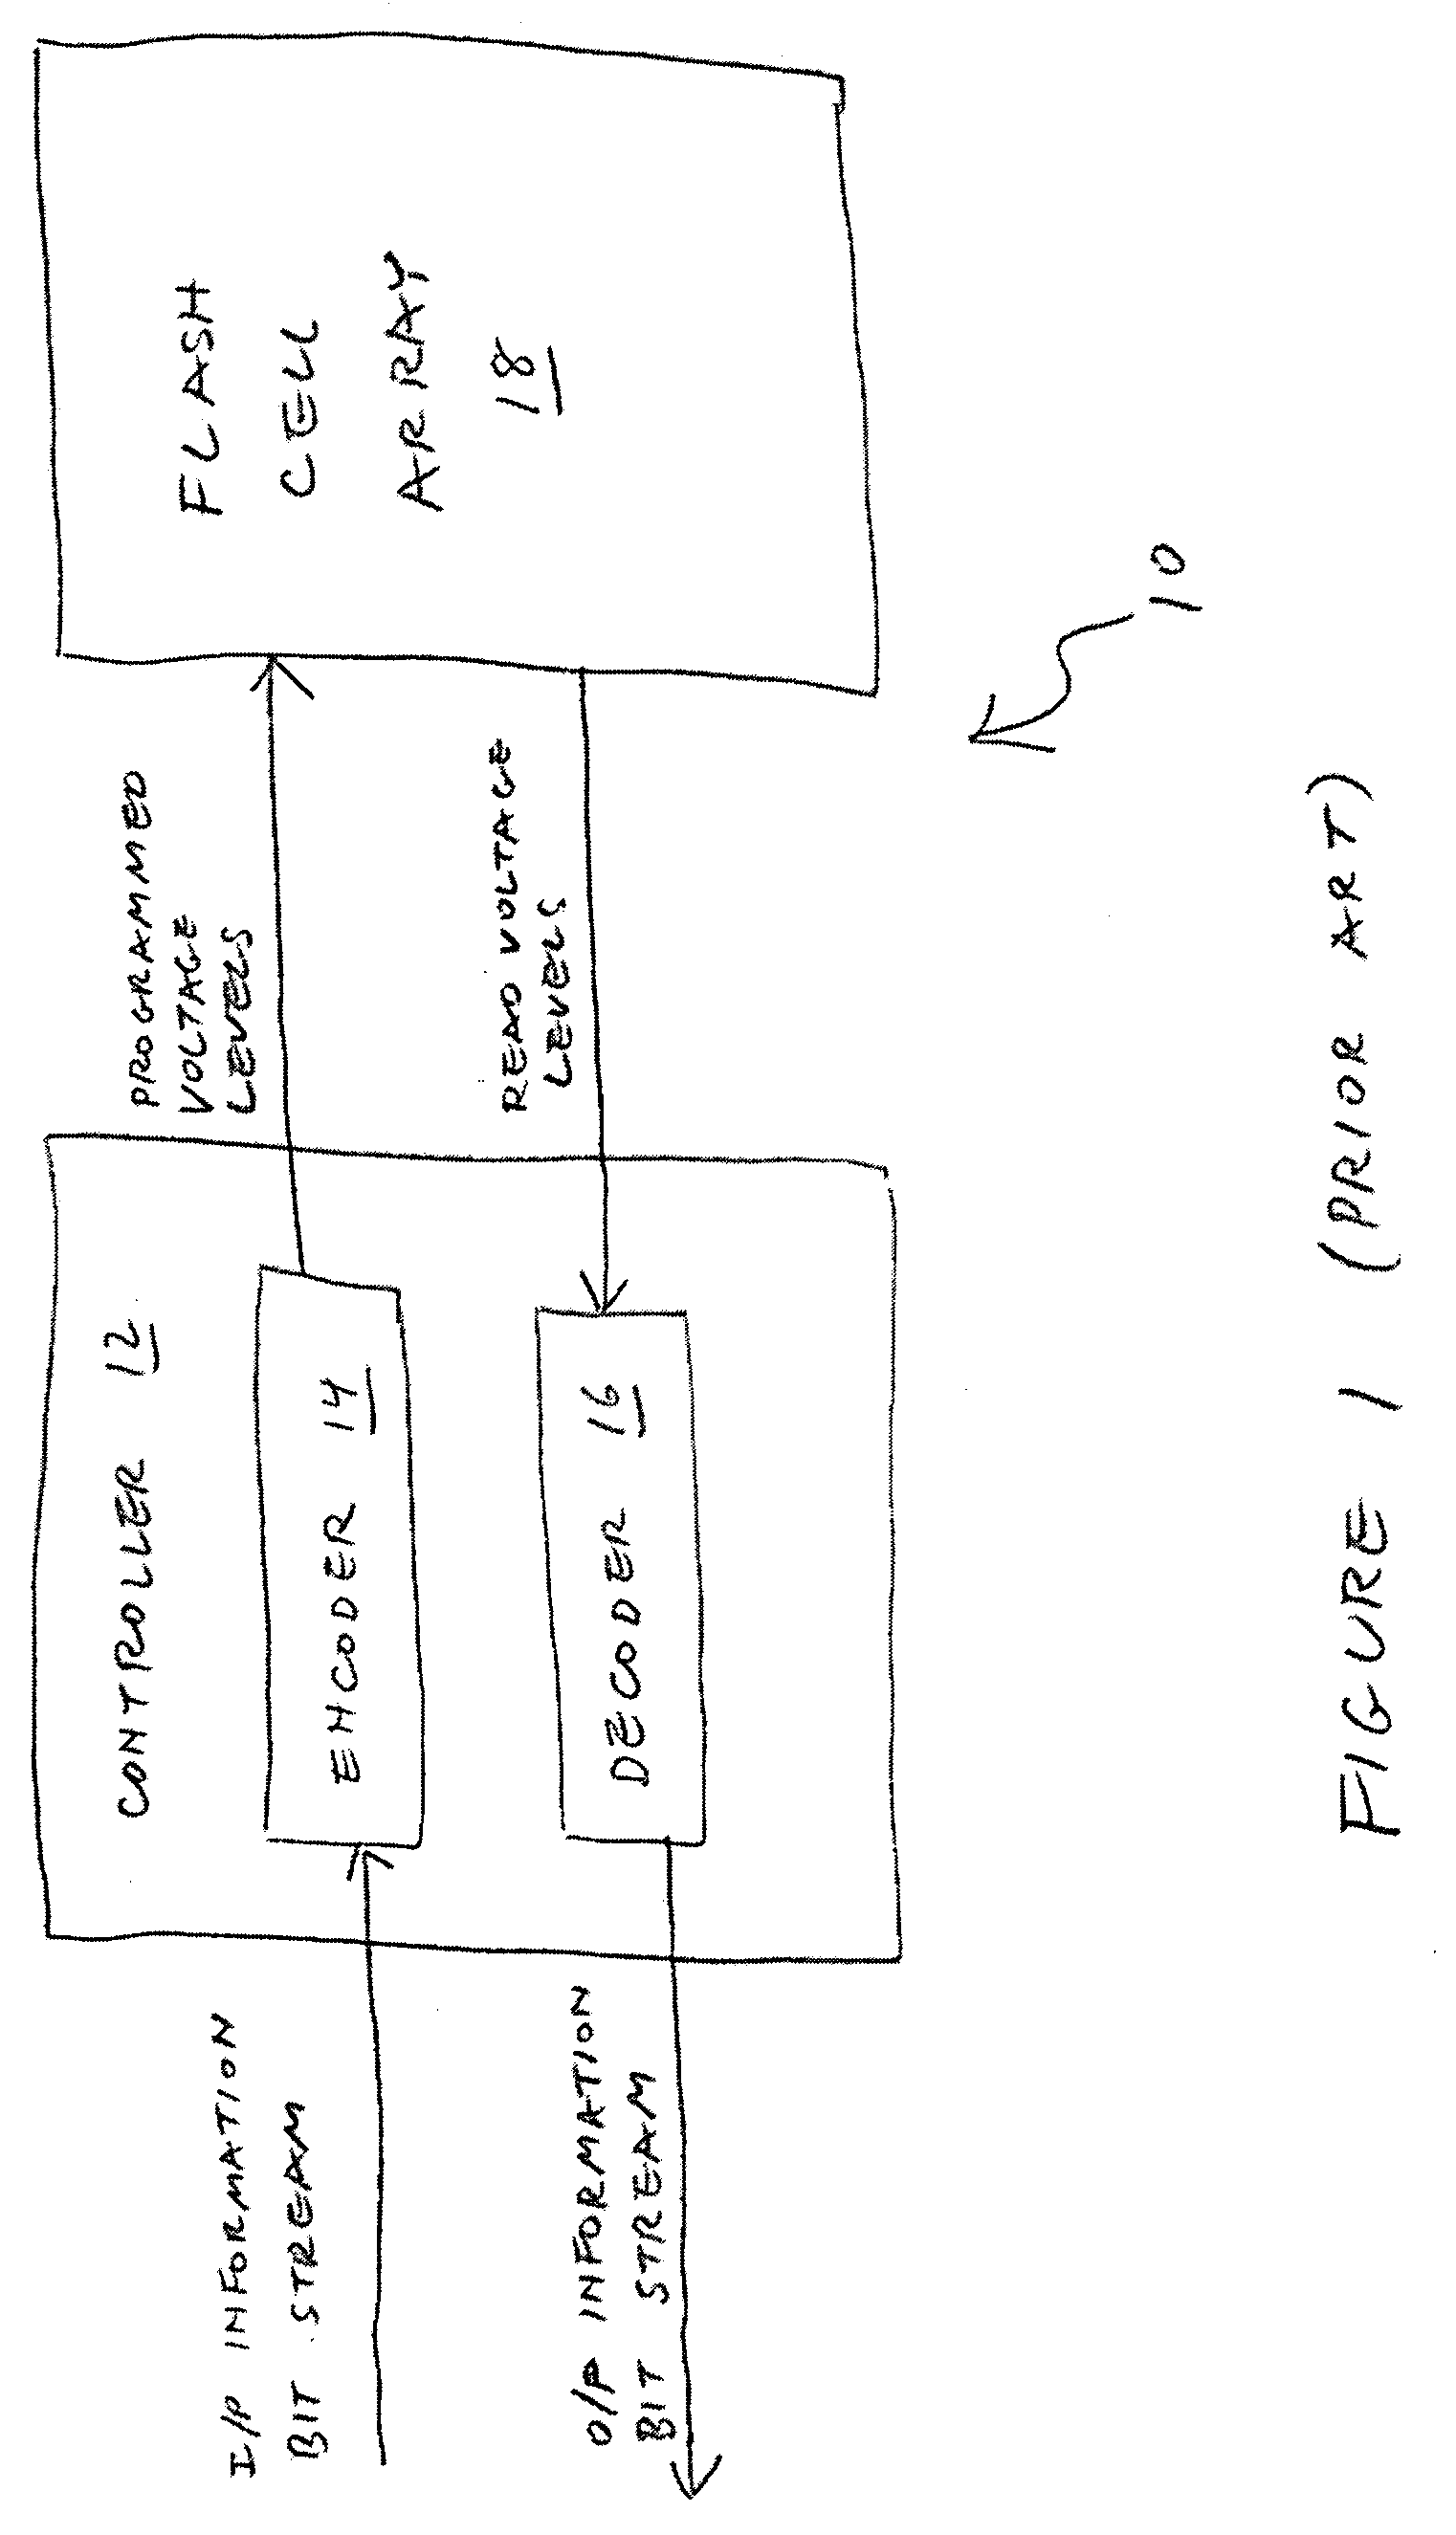 Multi-bit-per-cell flash memory device with non-bijective mapping